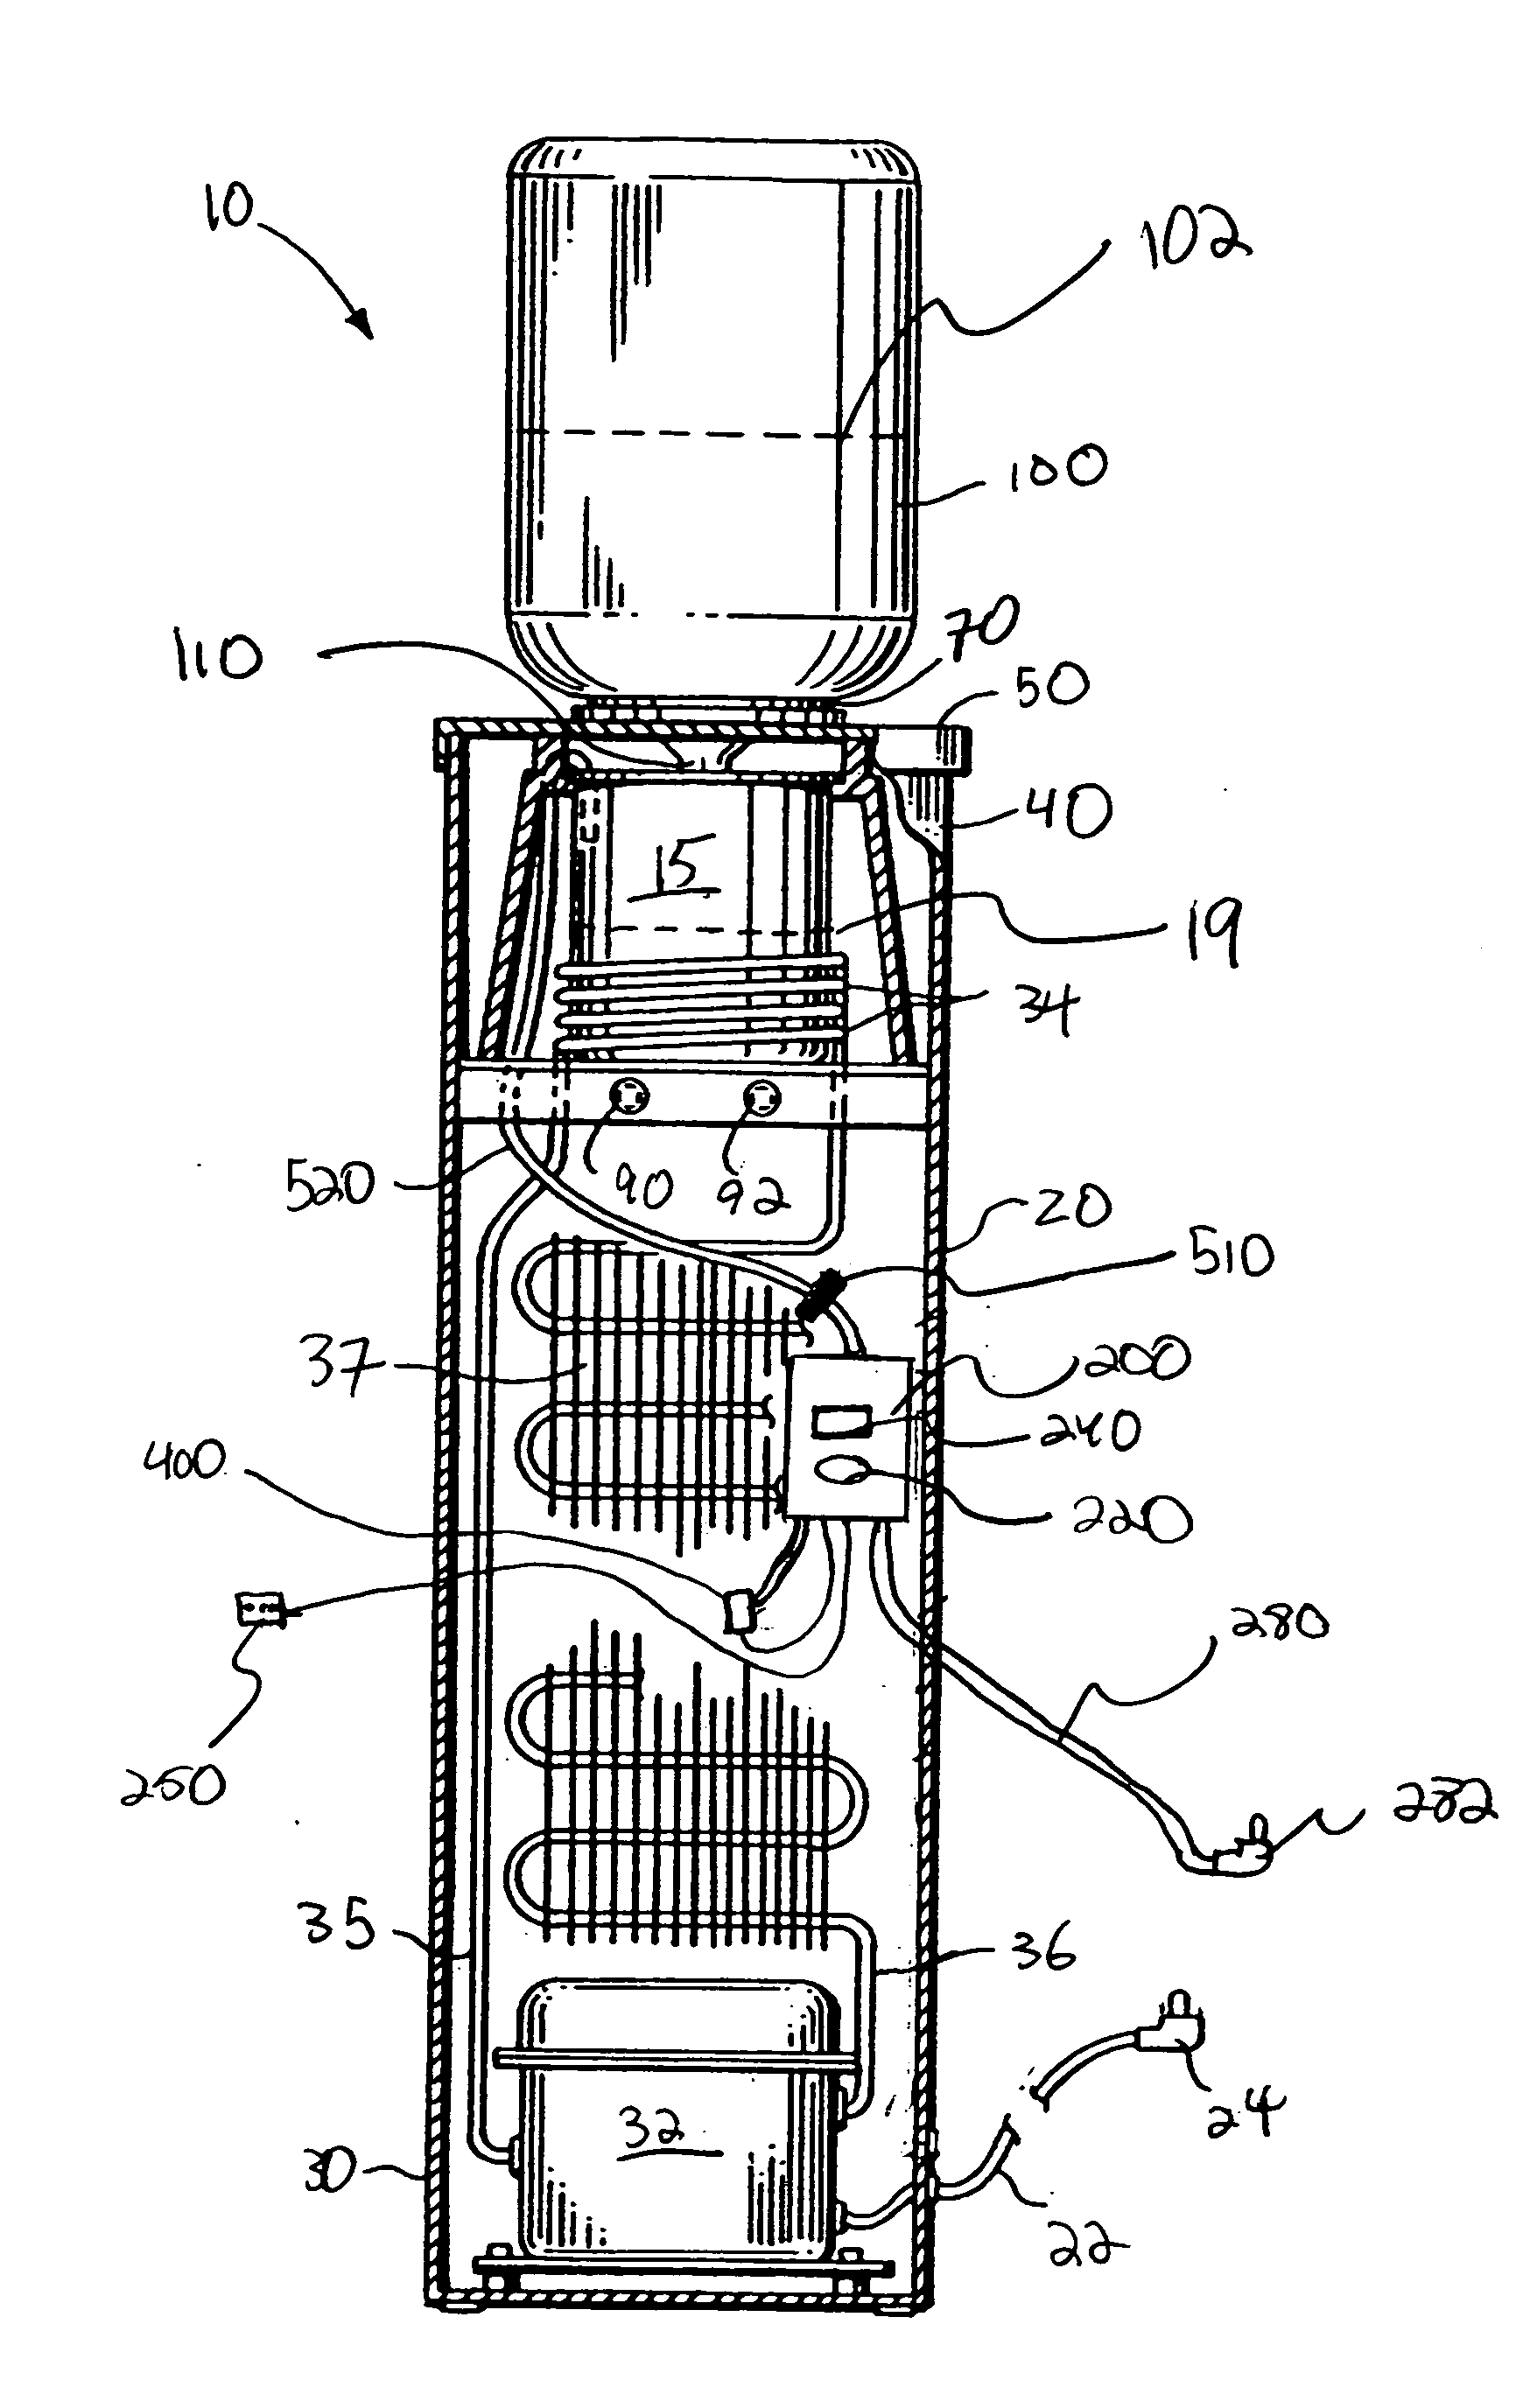 Method and apparatus for programably treating water in a water cooler